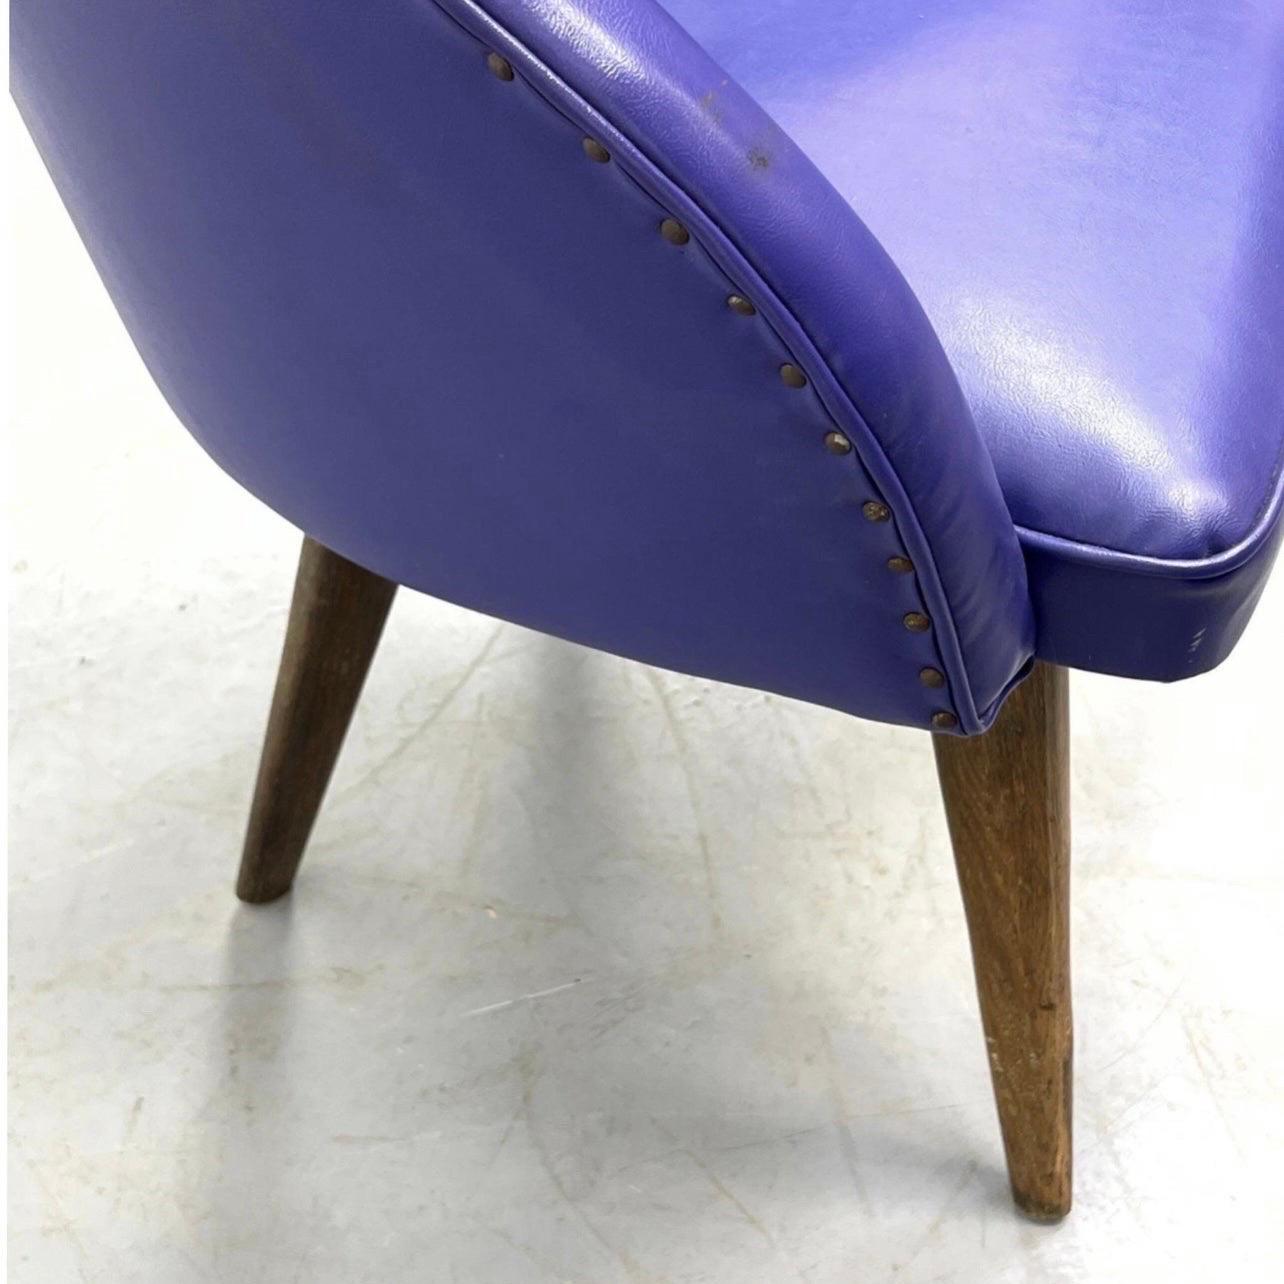 Mid-Century Modern Danish Modern Purple Upholstered Barrel Tub Chairs - a Pair For Sale